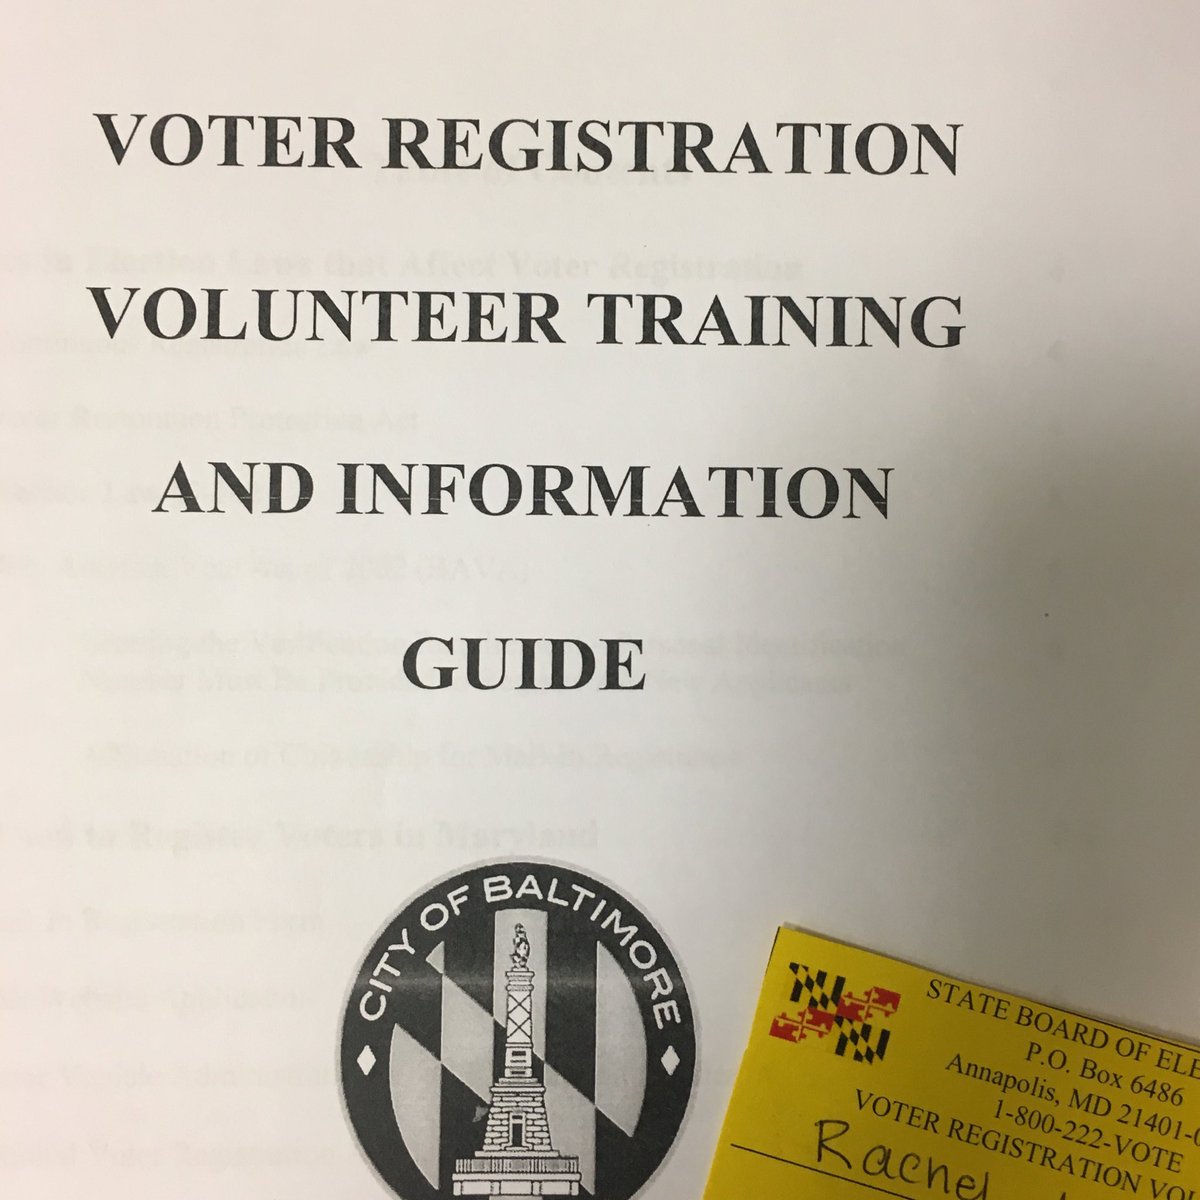 Last day to register to #vote in Maryland is Next Tuesday, Oct 16th! Come see me if you need to register before then, all of us Hopkins #AdolescentMedicine folks are official voter registration volunteers!